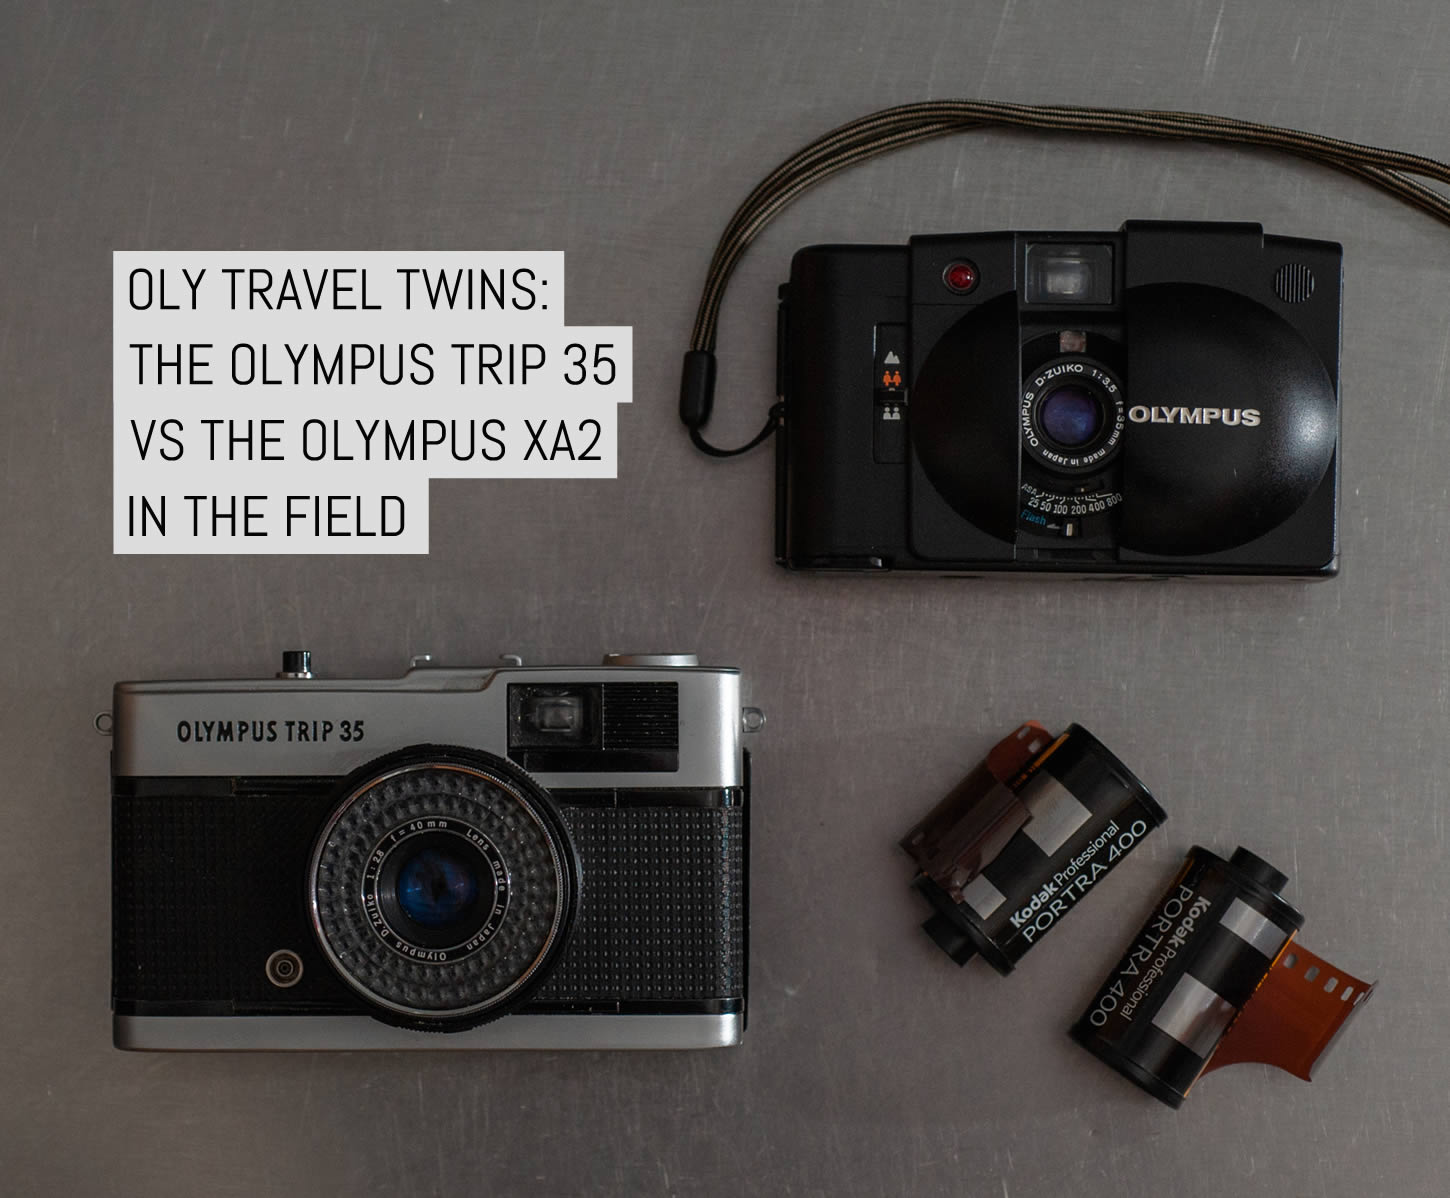 Oly travel twins: The Olympus Trip 35 vs the Olympus XA2 in the field -  EMULSIVE